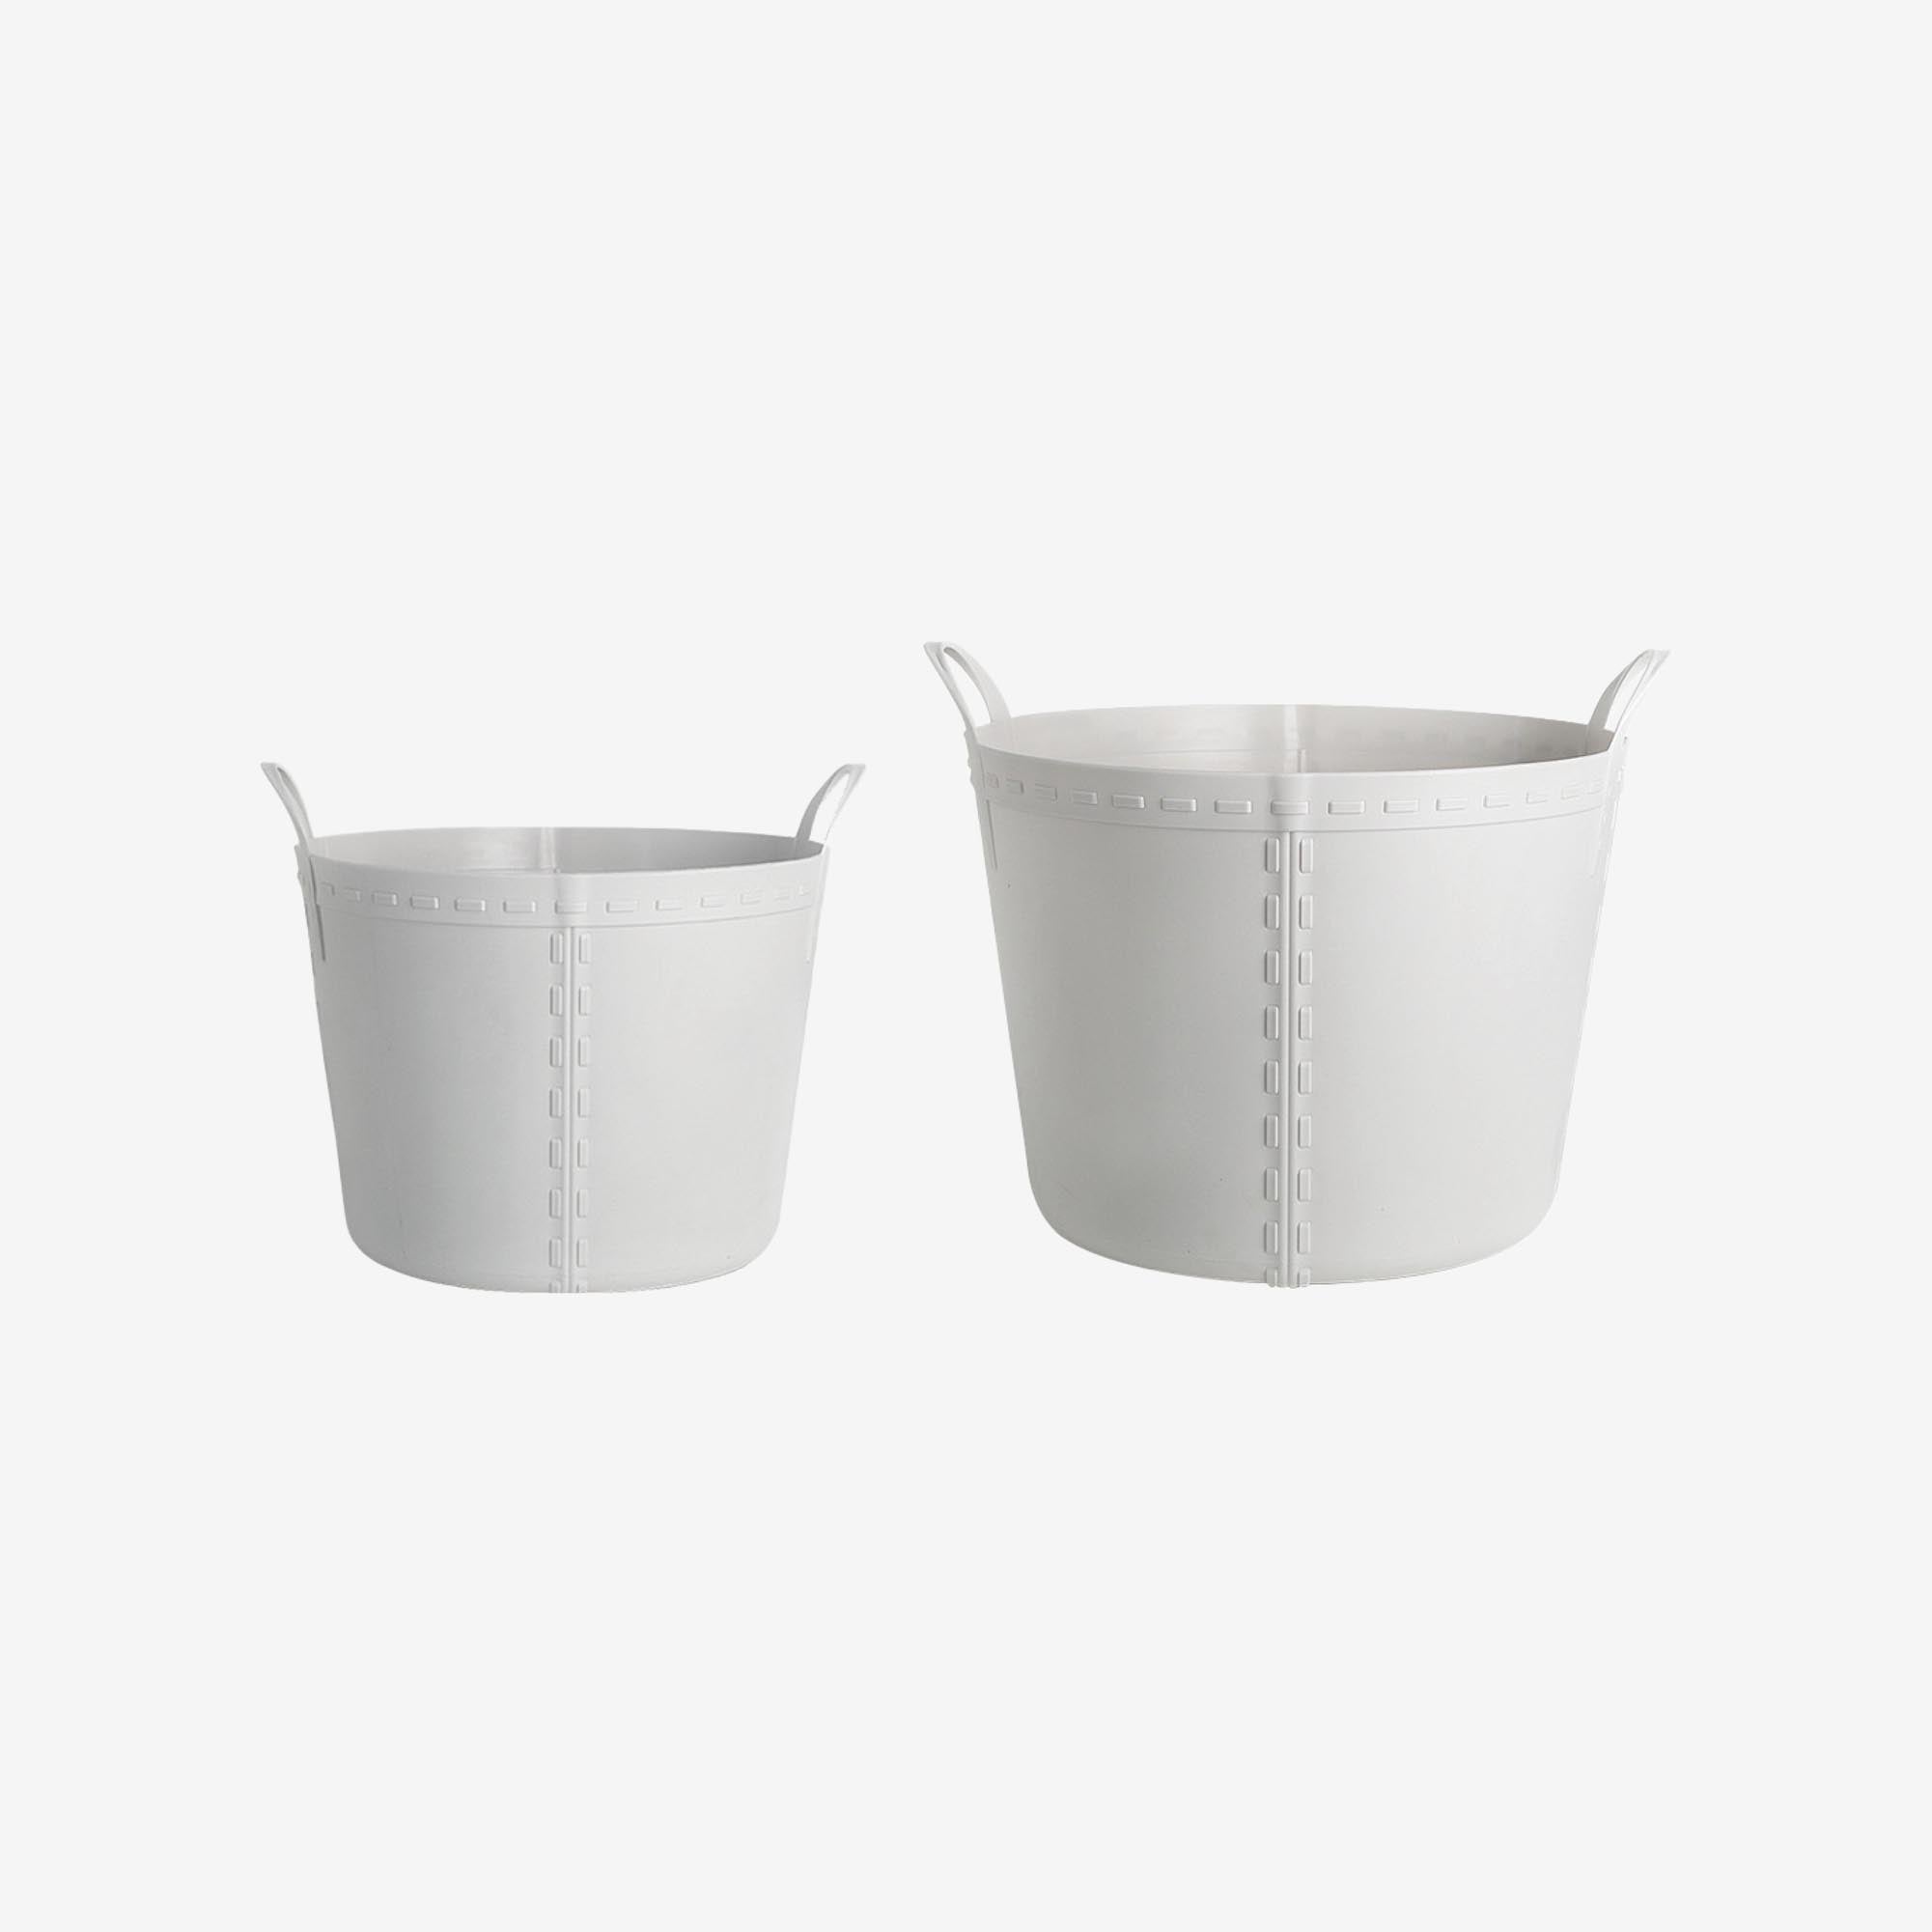 Woven Laundry Basket (set of two)